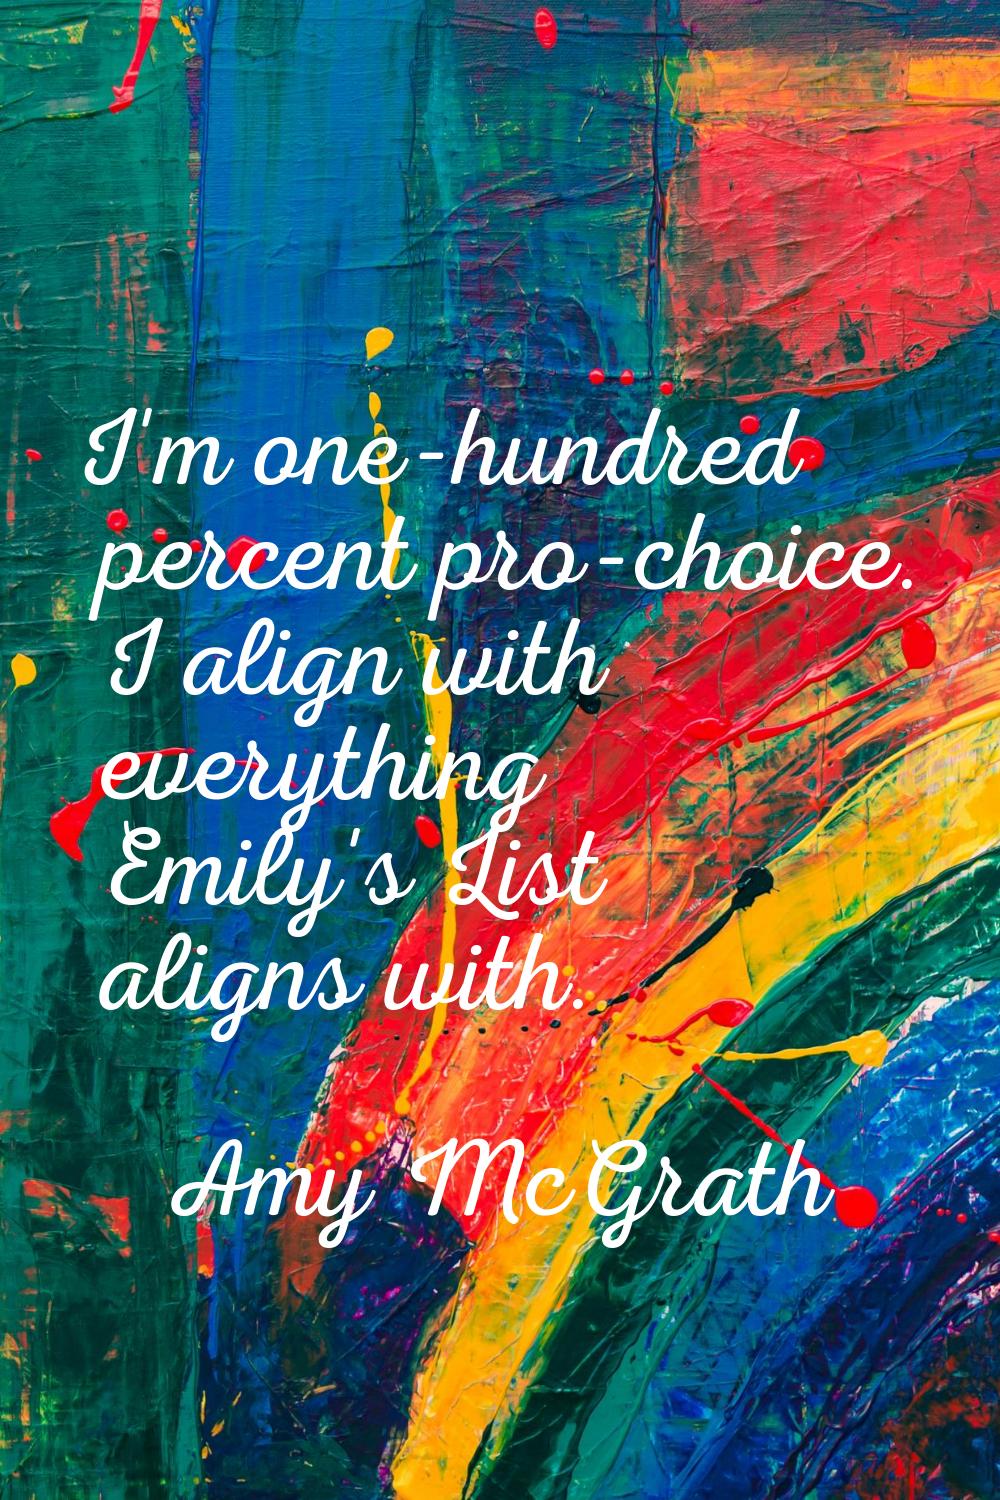 I'm one-hundred percent pro-choice. I align with everything Emily's List aligns with.